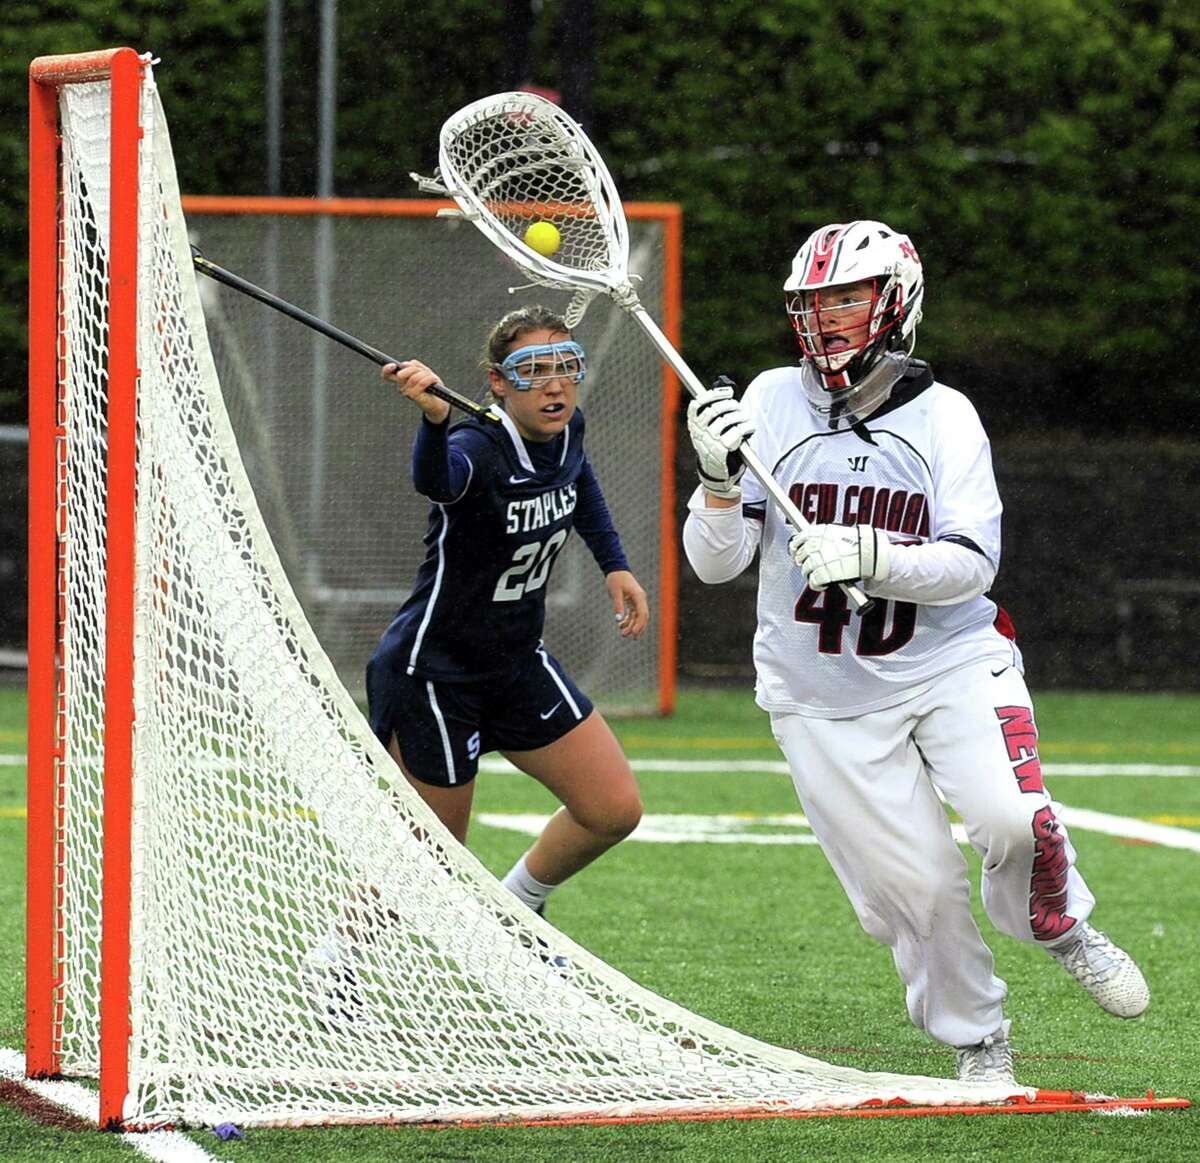 New Canaan goalie Caroline O’Dea looks to pass after making a save against Staples in Tuesday’s 16-8 win over Staples at Dunning Stadium.